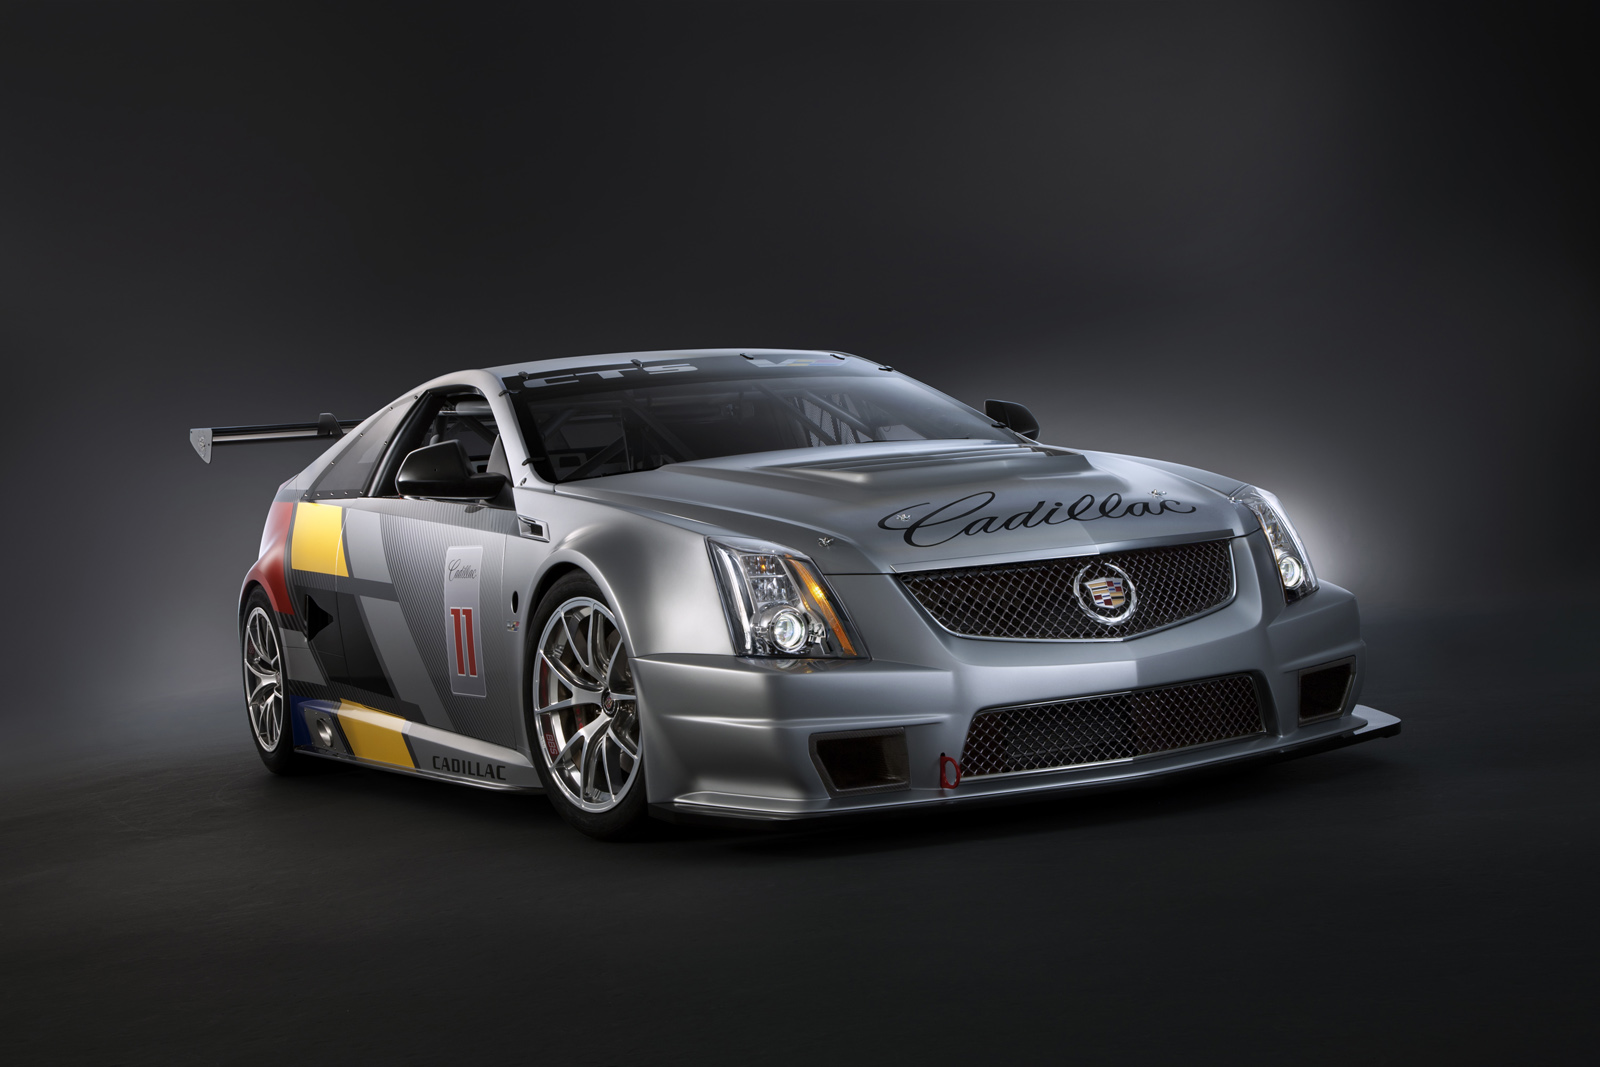 2011 Cadillac CTS-V Coupe Racecar